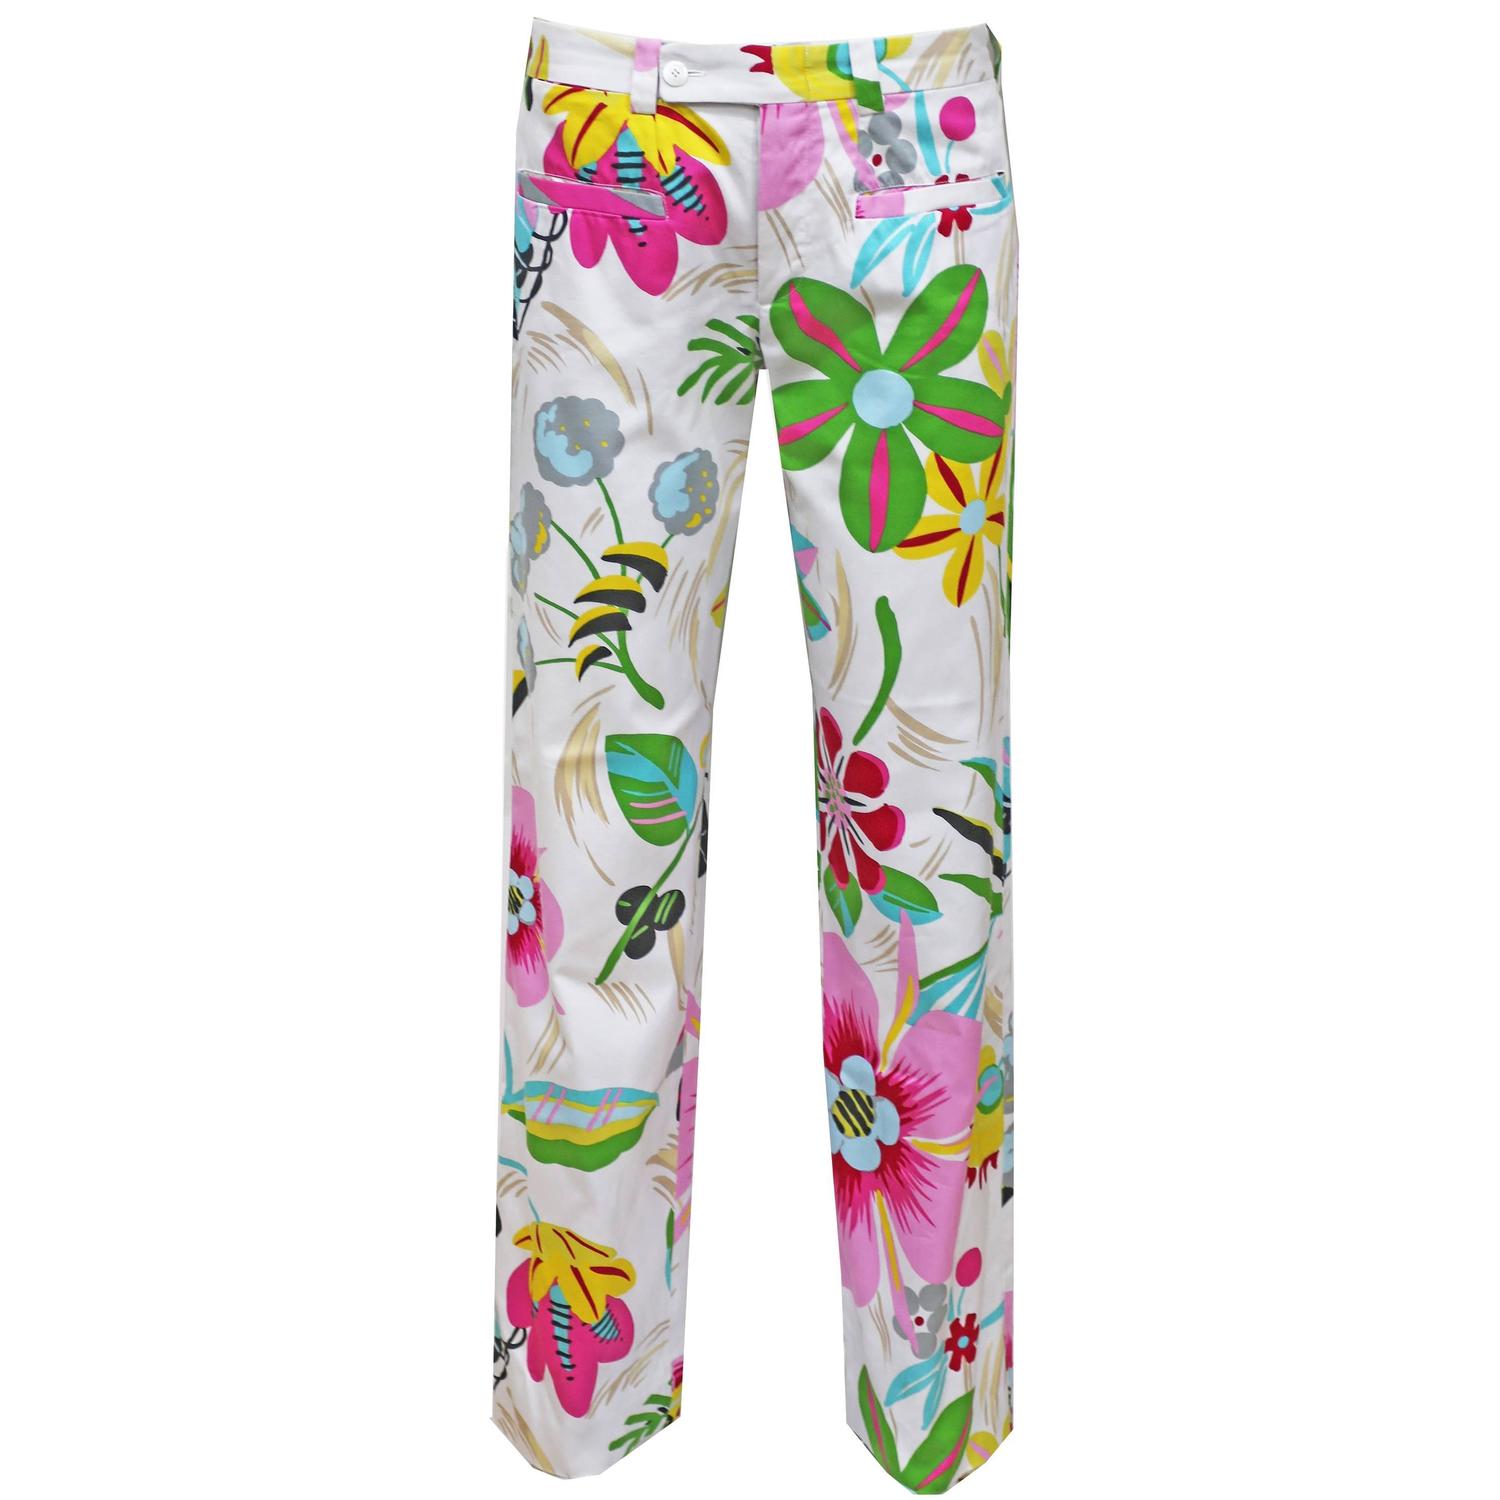 Gucci by Tom Ford floral cotton pants, c. 1999 at 1stdibs